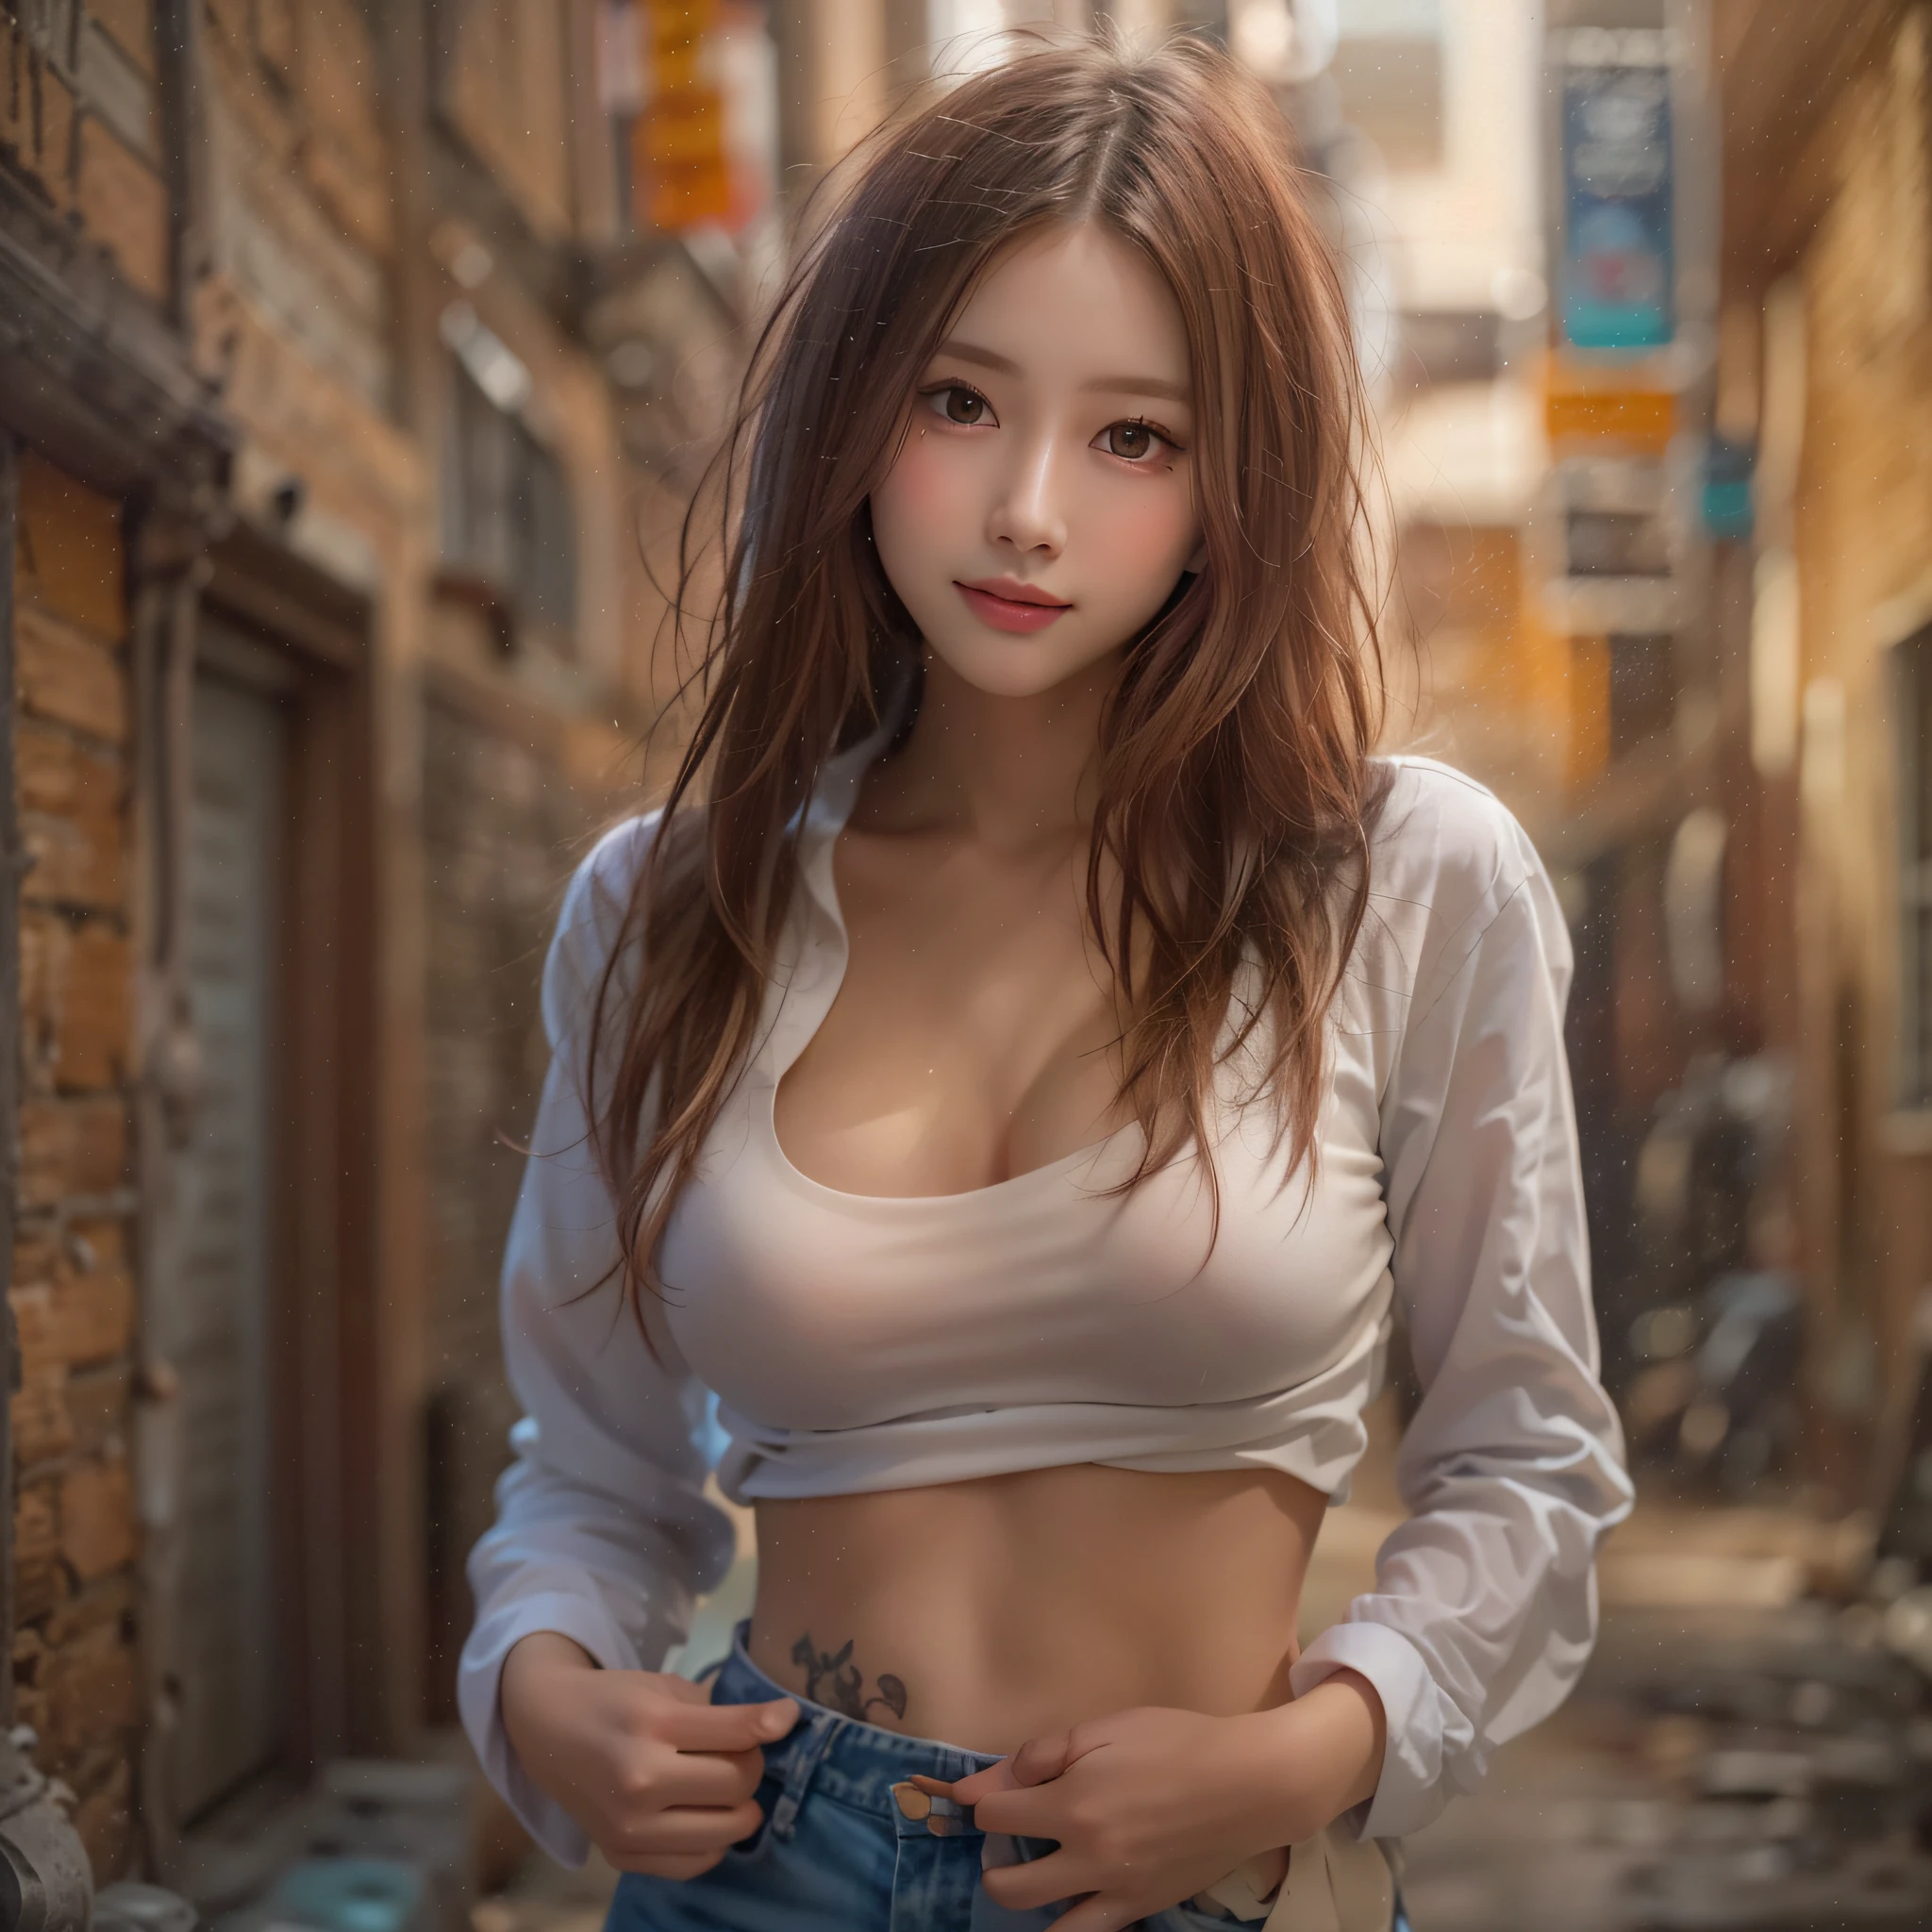 (masterpiece:1.2), (best quality:1.2), (extremely detailed:1.2), (extremely detailed face), (photorealistic:1.2), (ultra detailed), 1girl, closeup shot
upshirt, underboob, loose white shirt, short blue jeans, (sexy panty straps:0.5), (crouch tattoo)
slim and  body, medium , long hair, ([light orange | brown] hair), (full body:1.2), seductive pose, looking at viewer, (view from below:1.2), smiling, standing in the small alley,